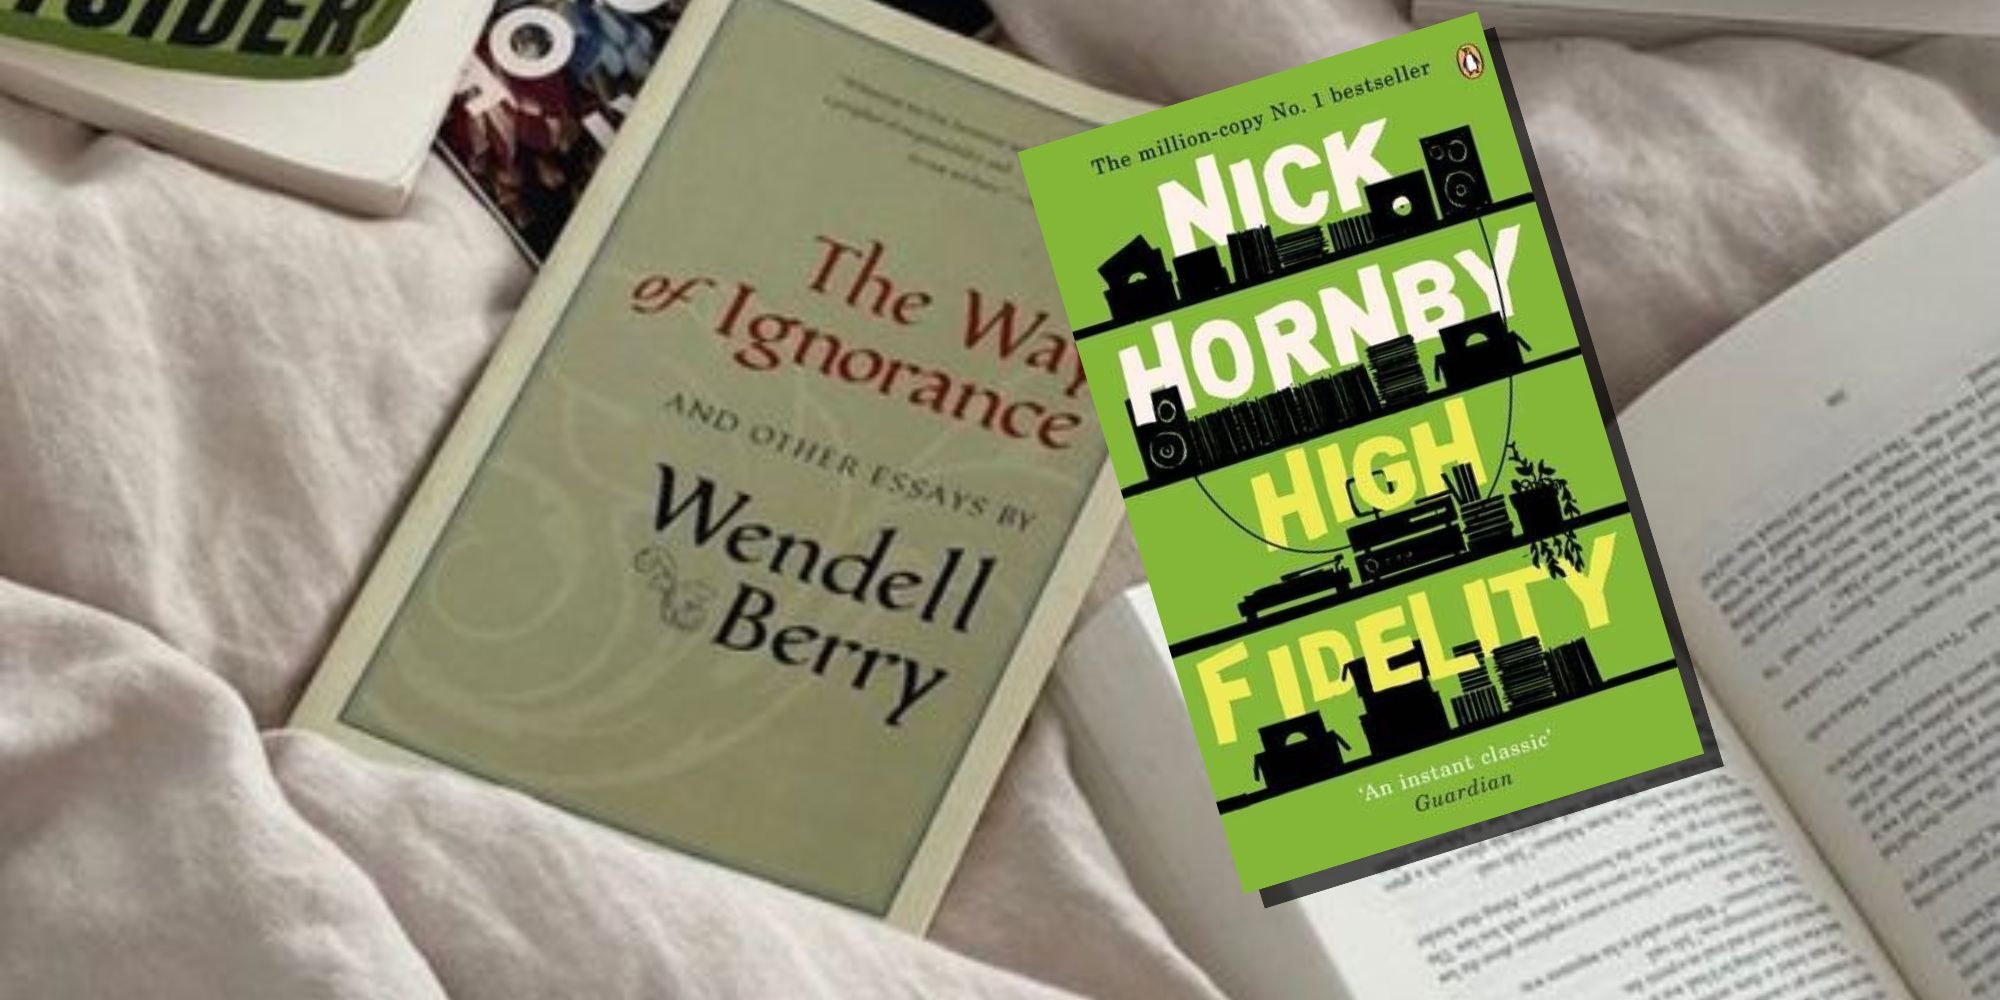 High Fidelity by Nick Hornby